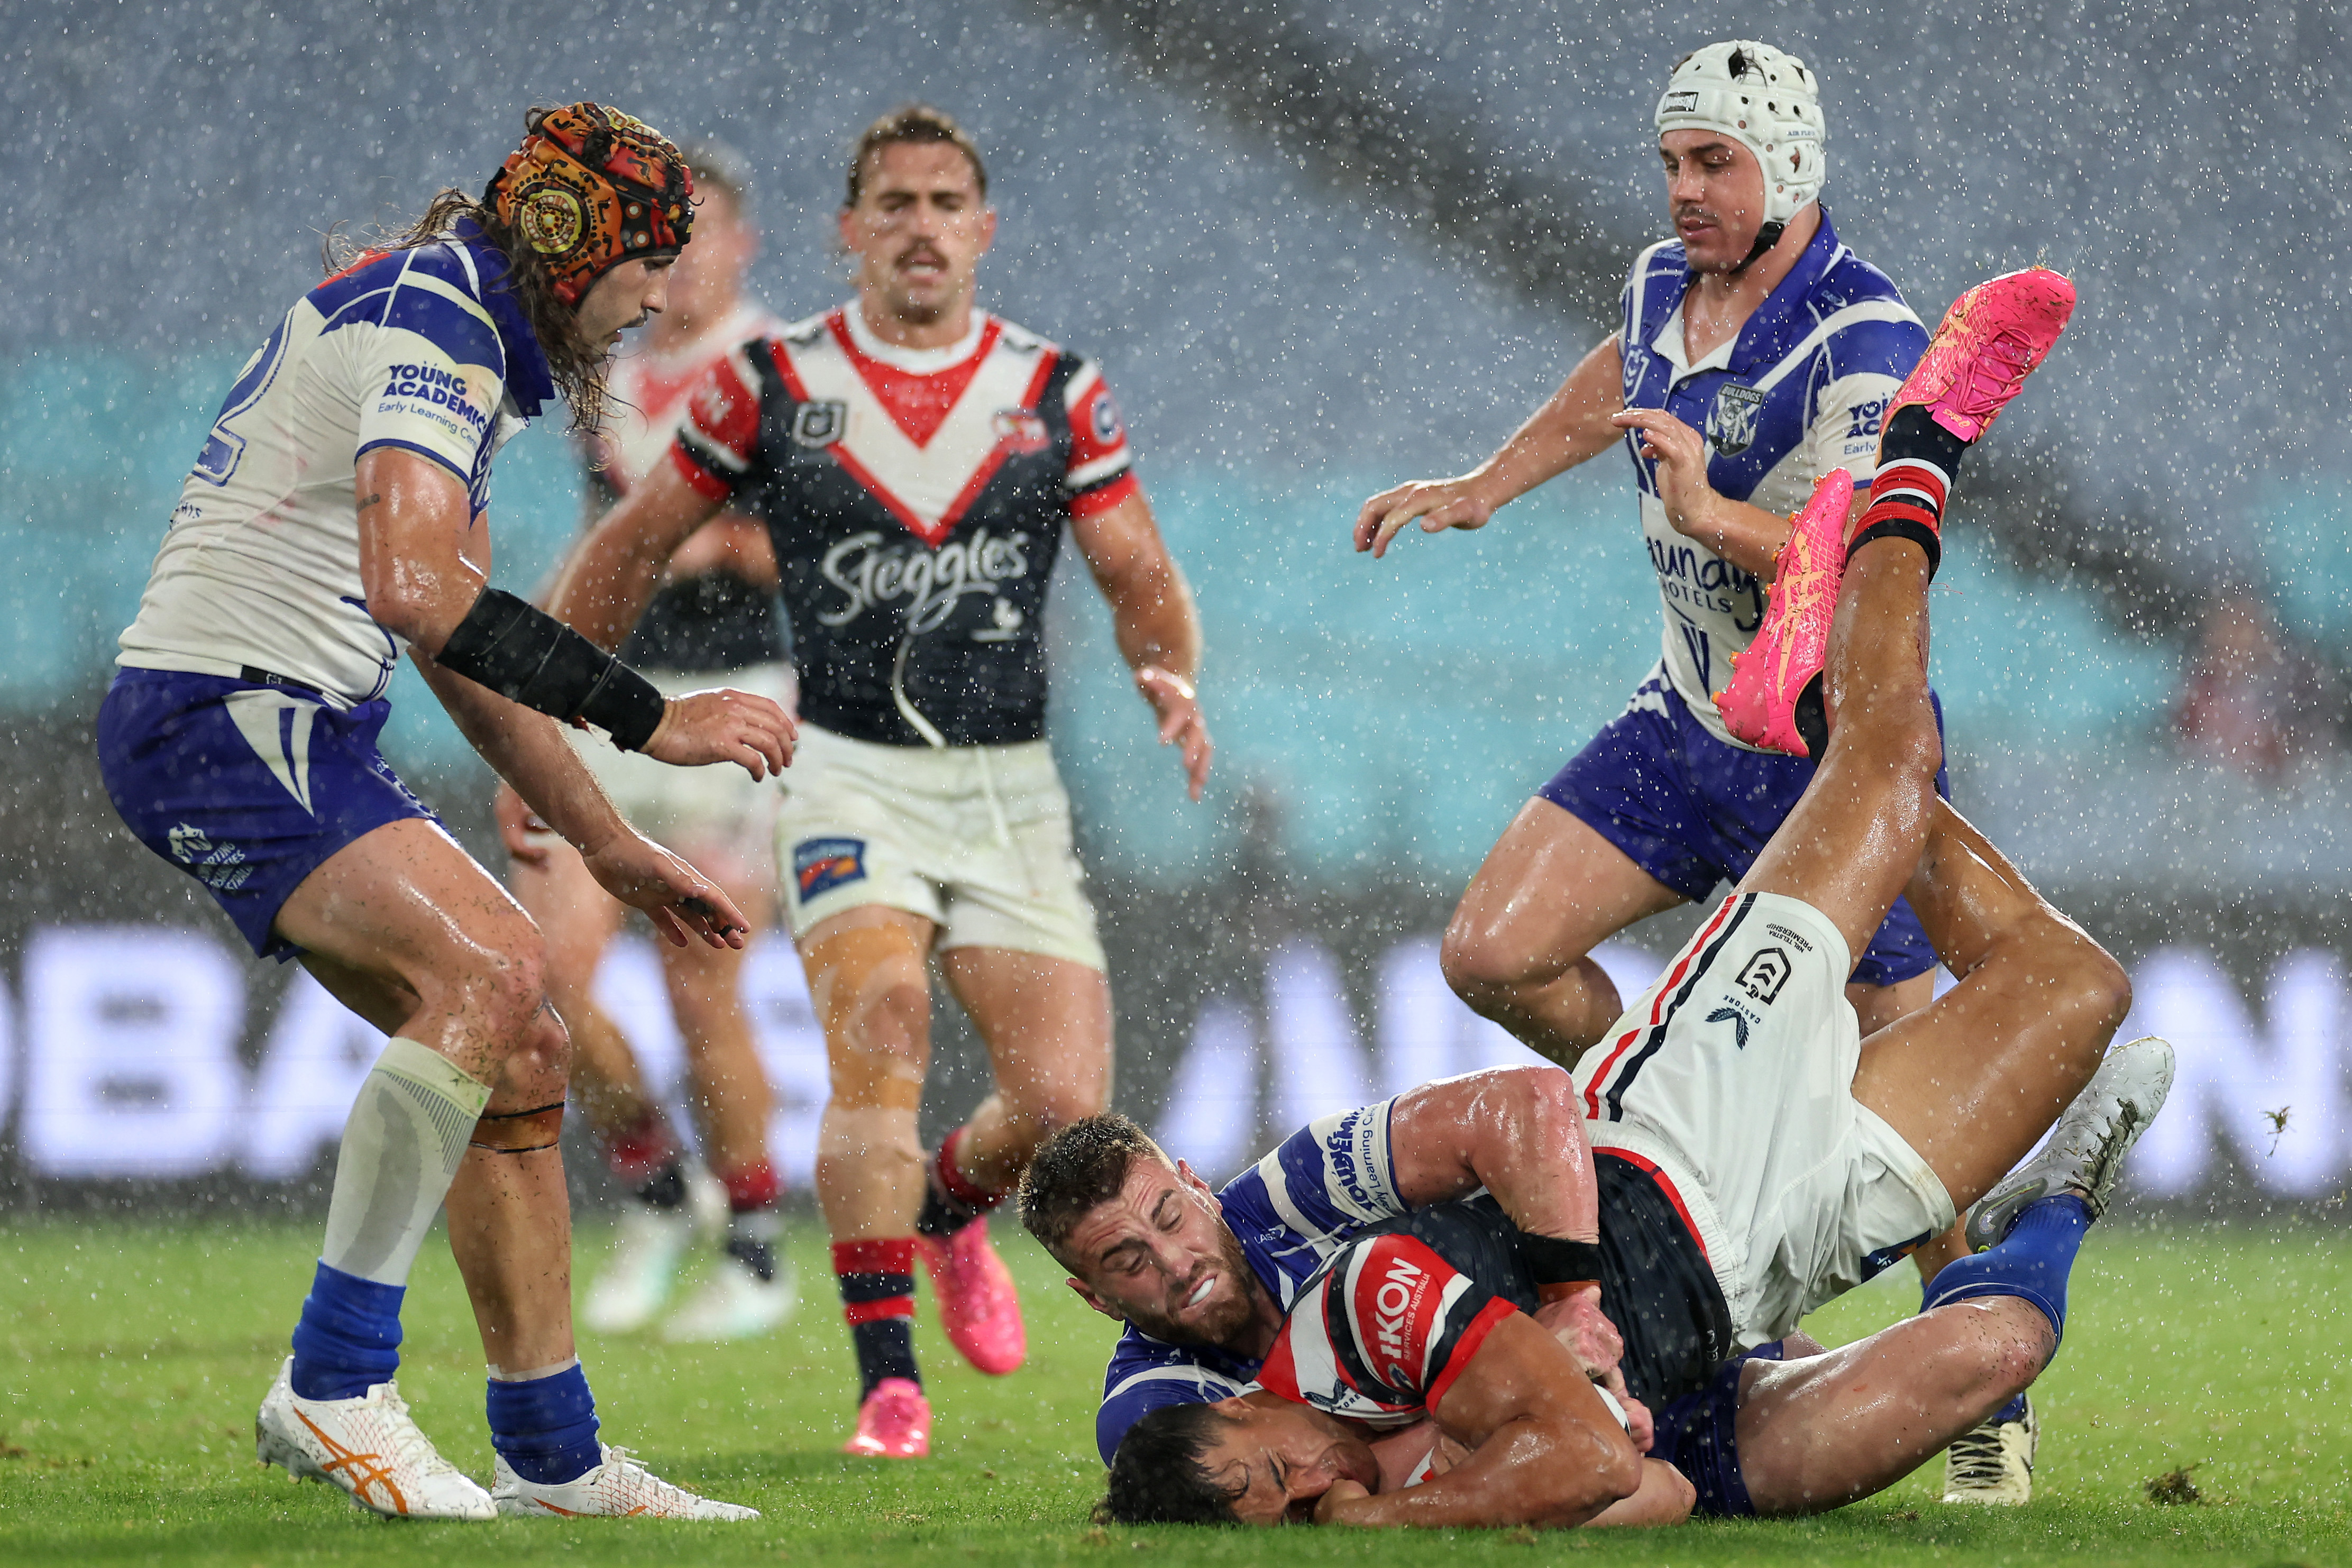 Bulldogs vs Roosters - Figure 4